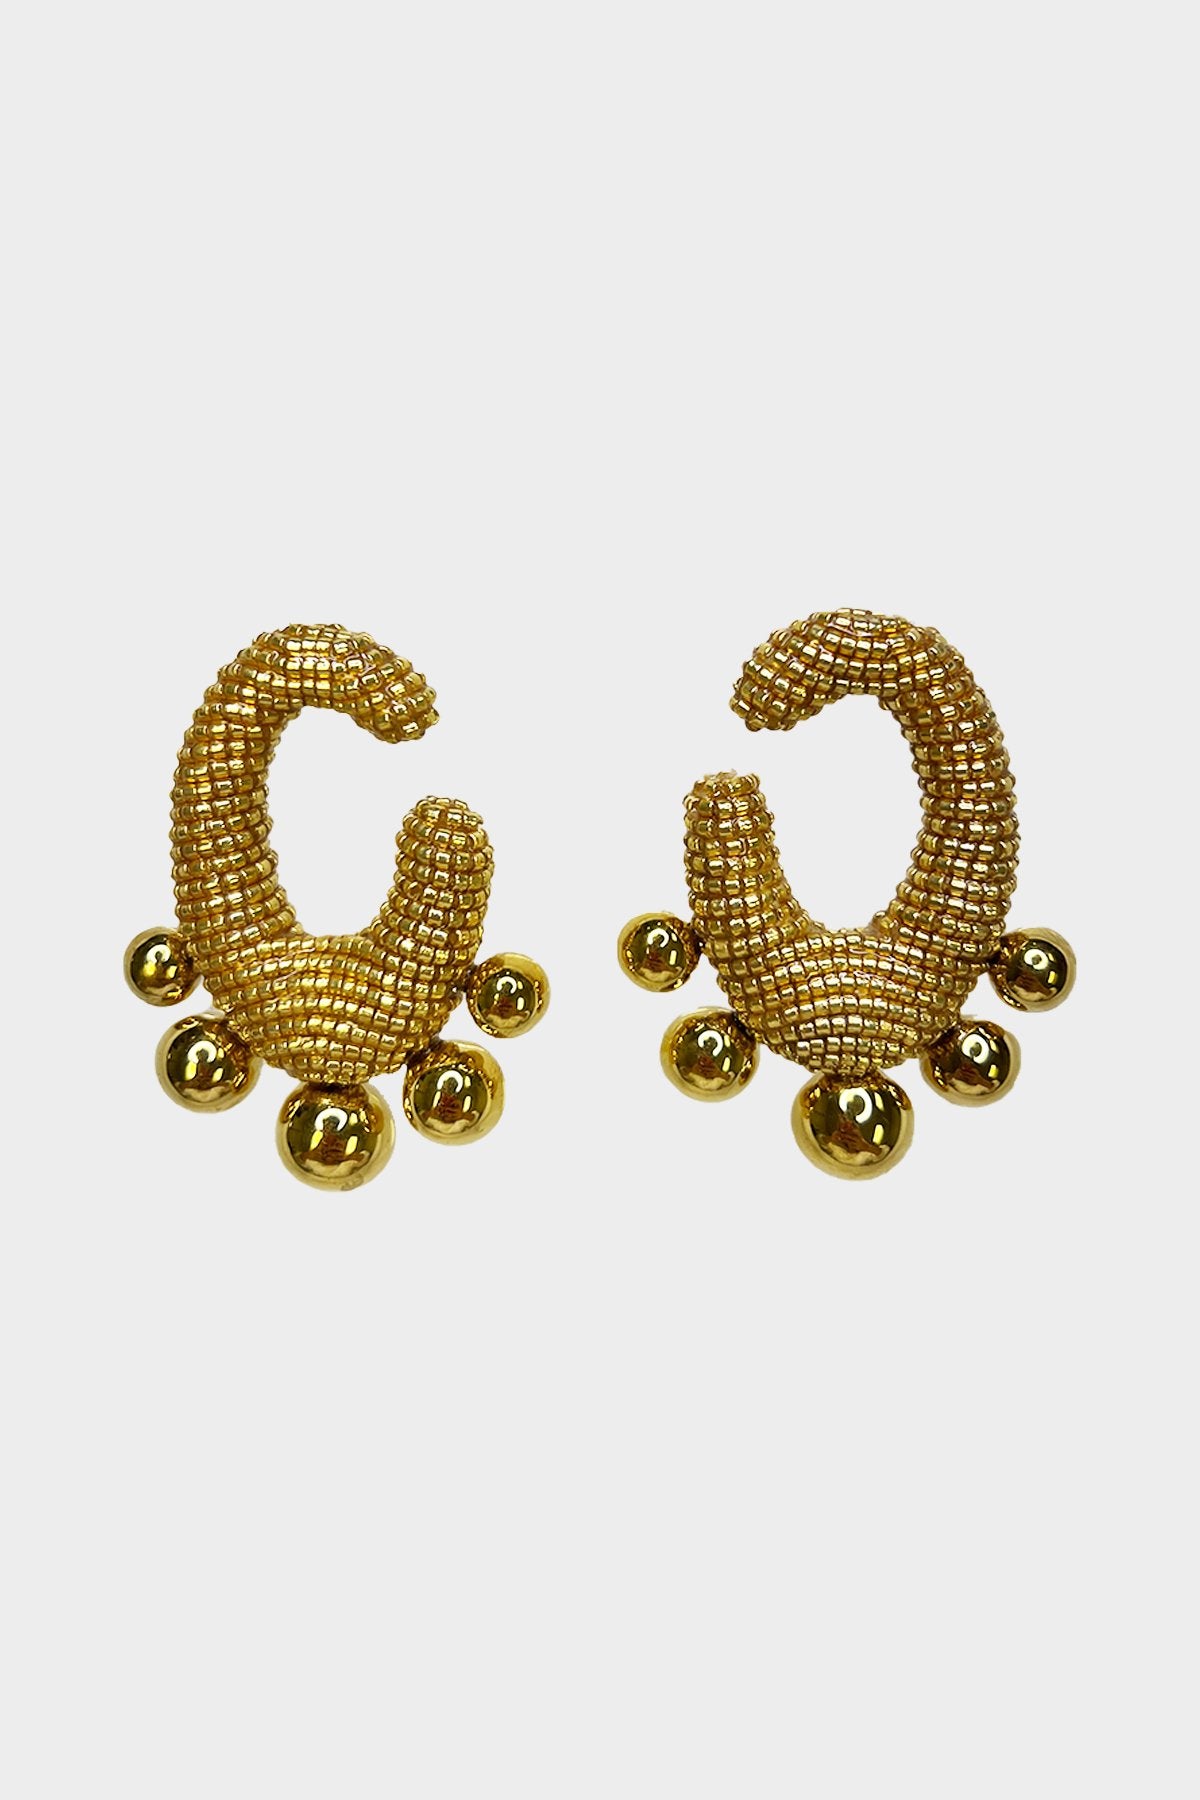 Pinto Earrings in Gold - shop-olivia.com